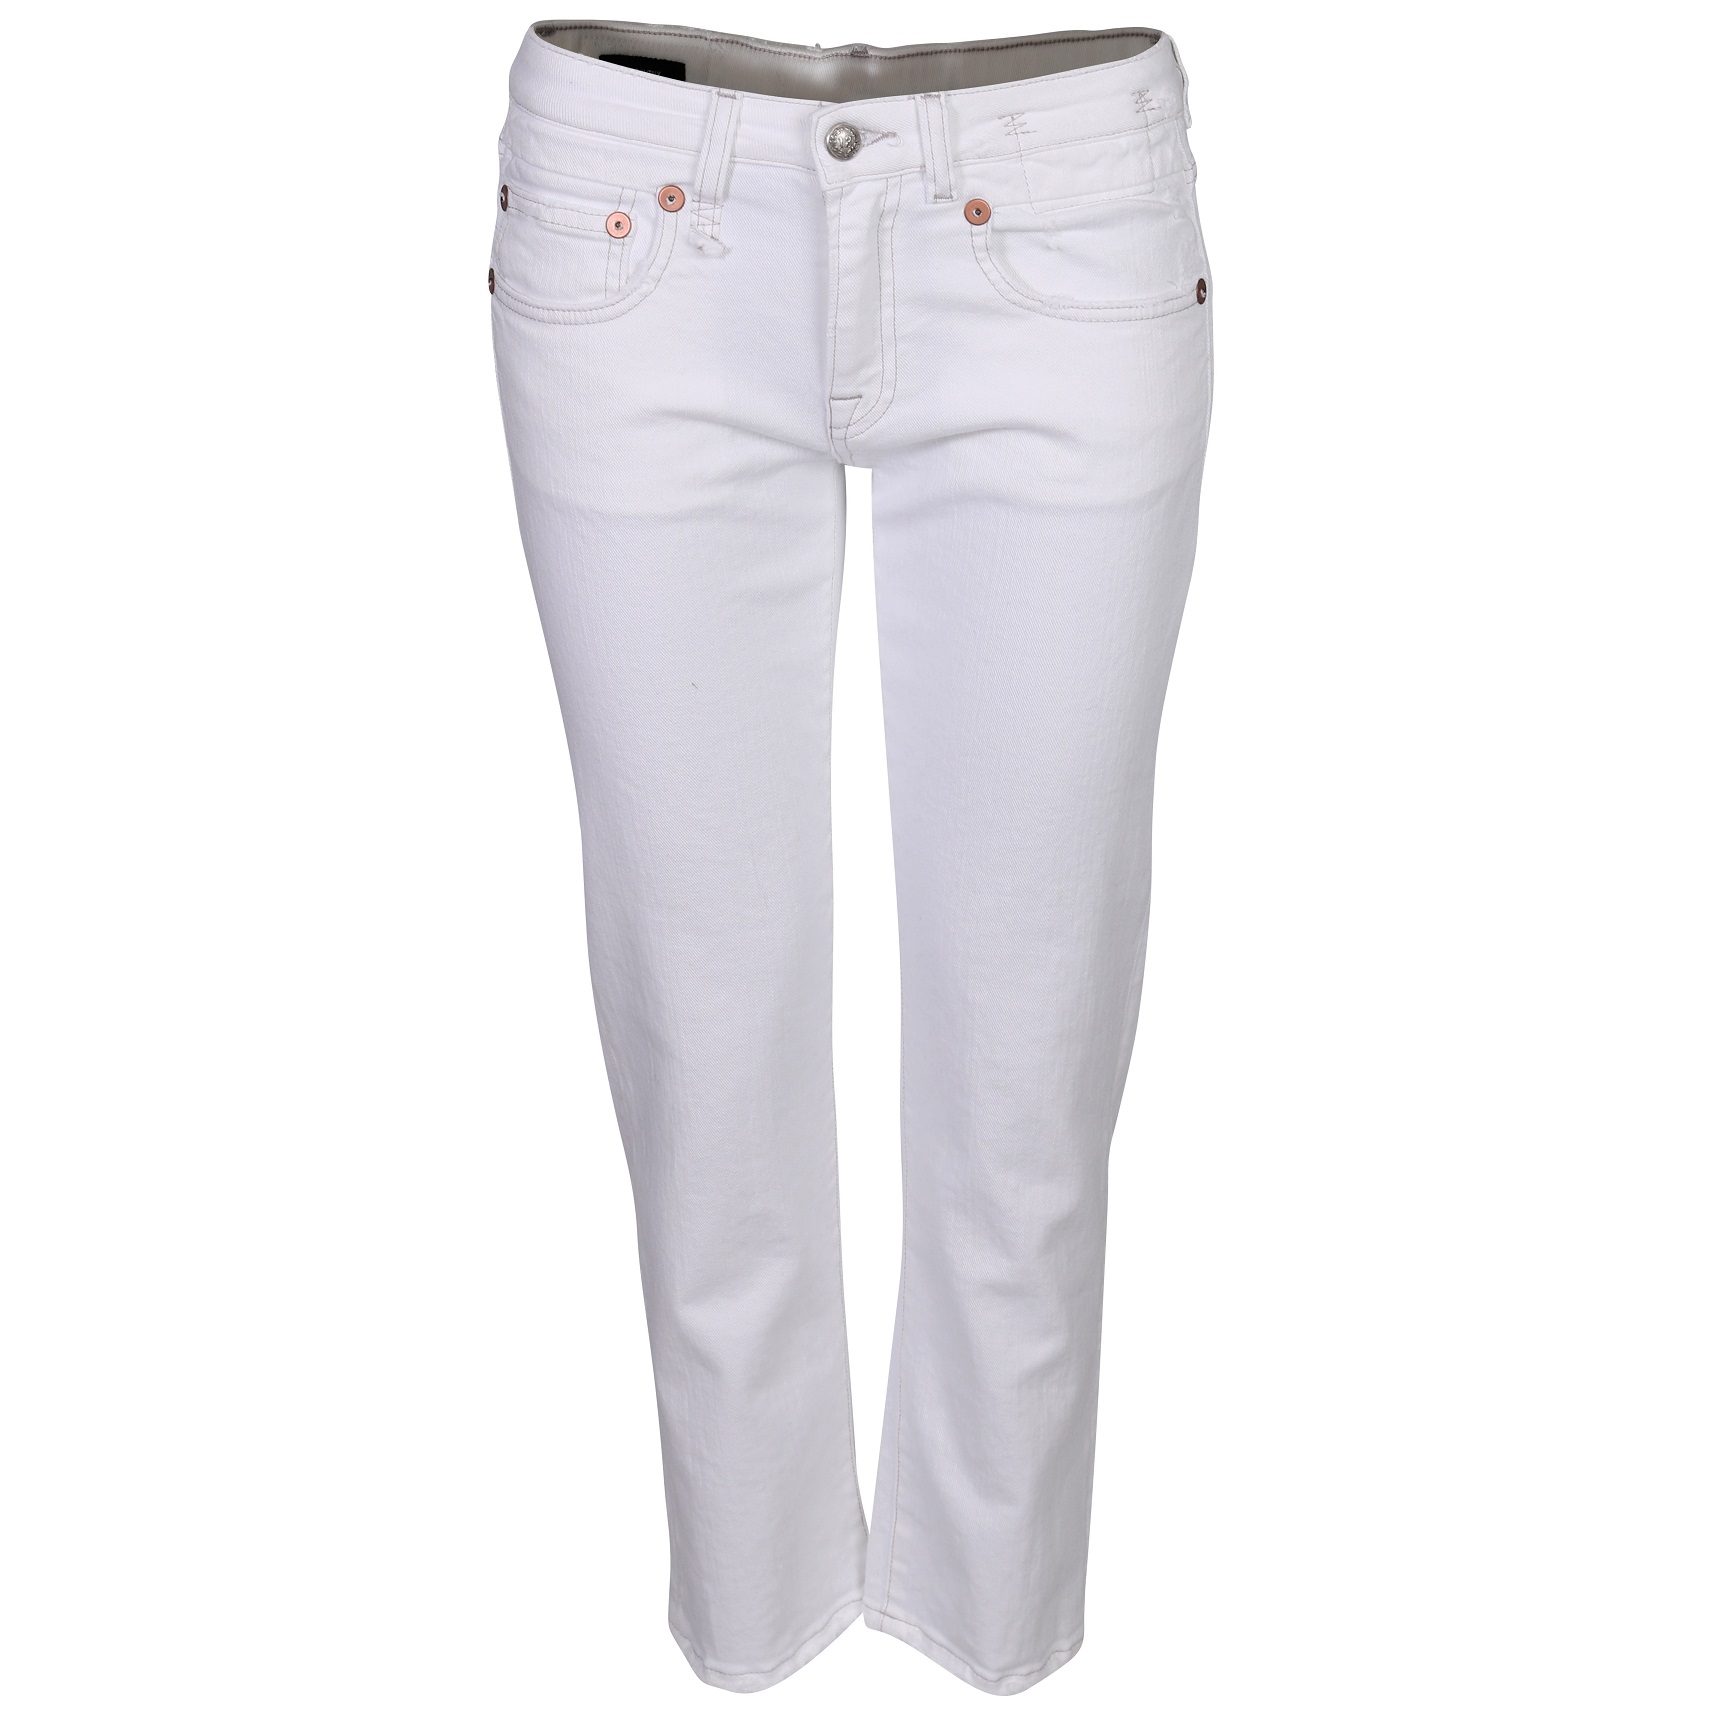 R13 Boy Straight Jeans in Bale White 29